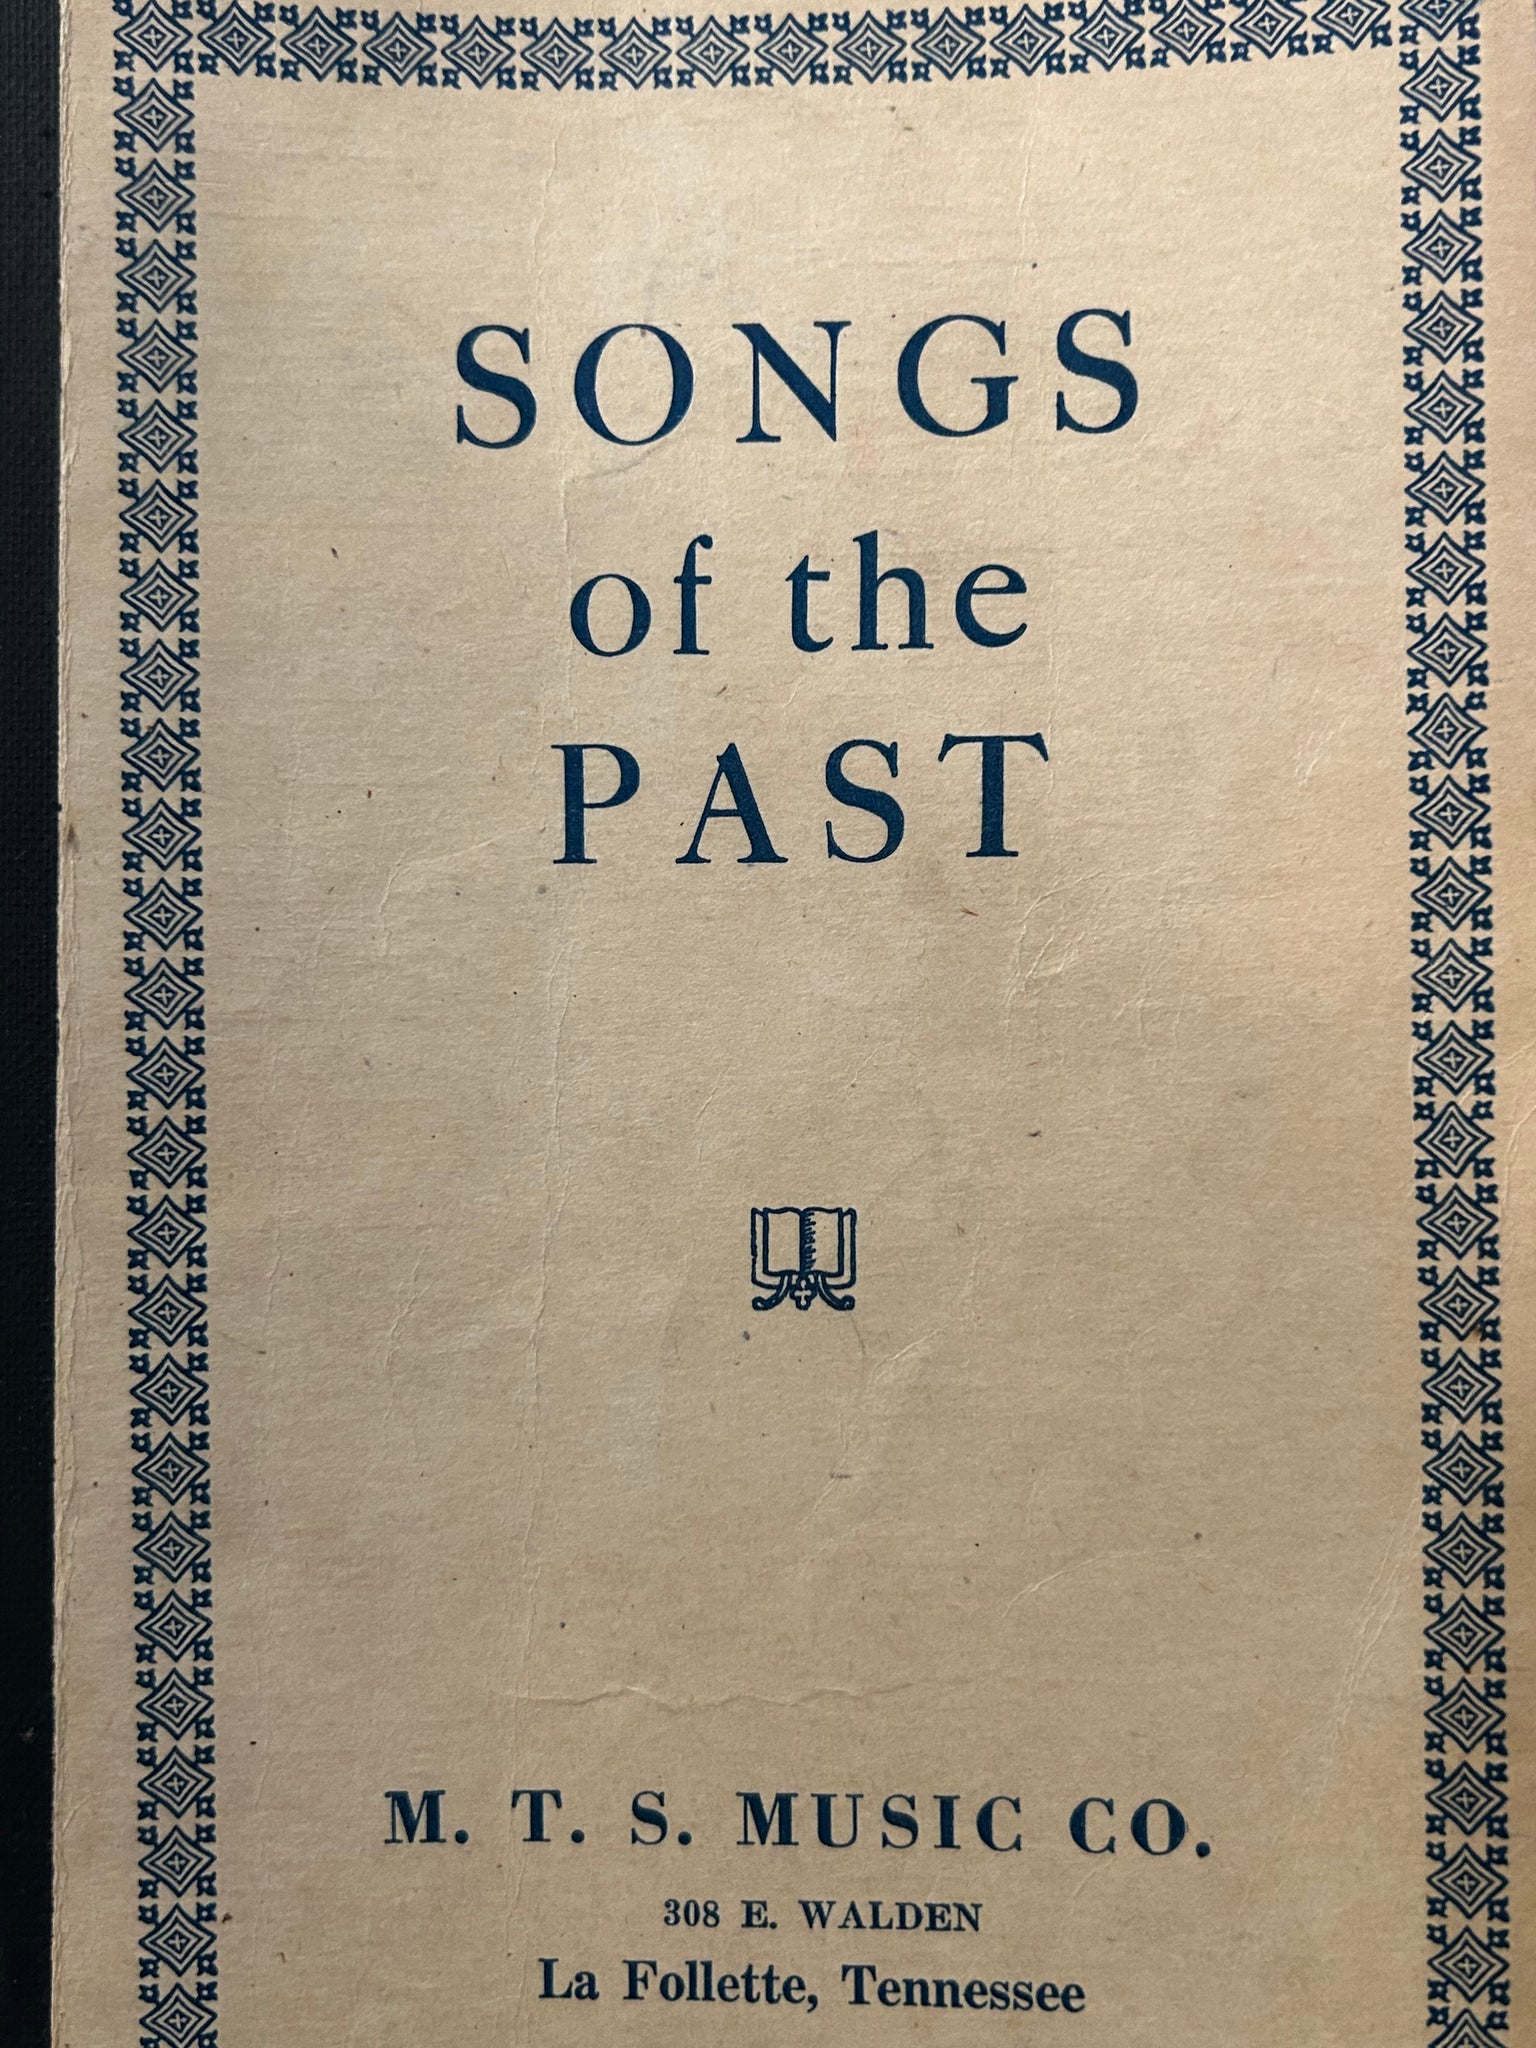 Songs of the Past